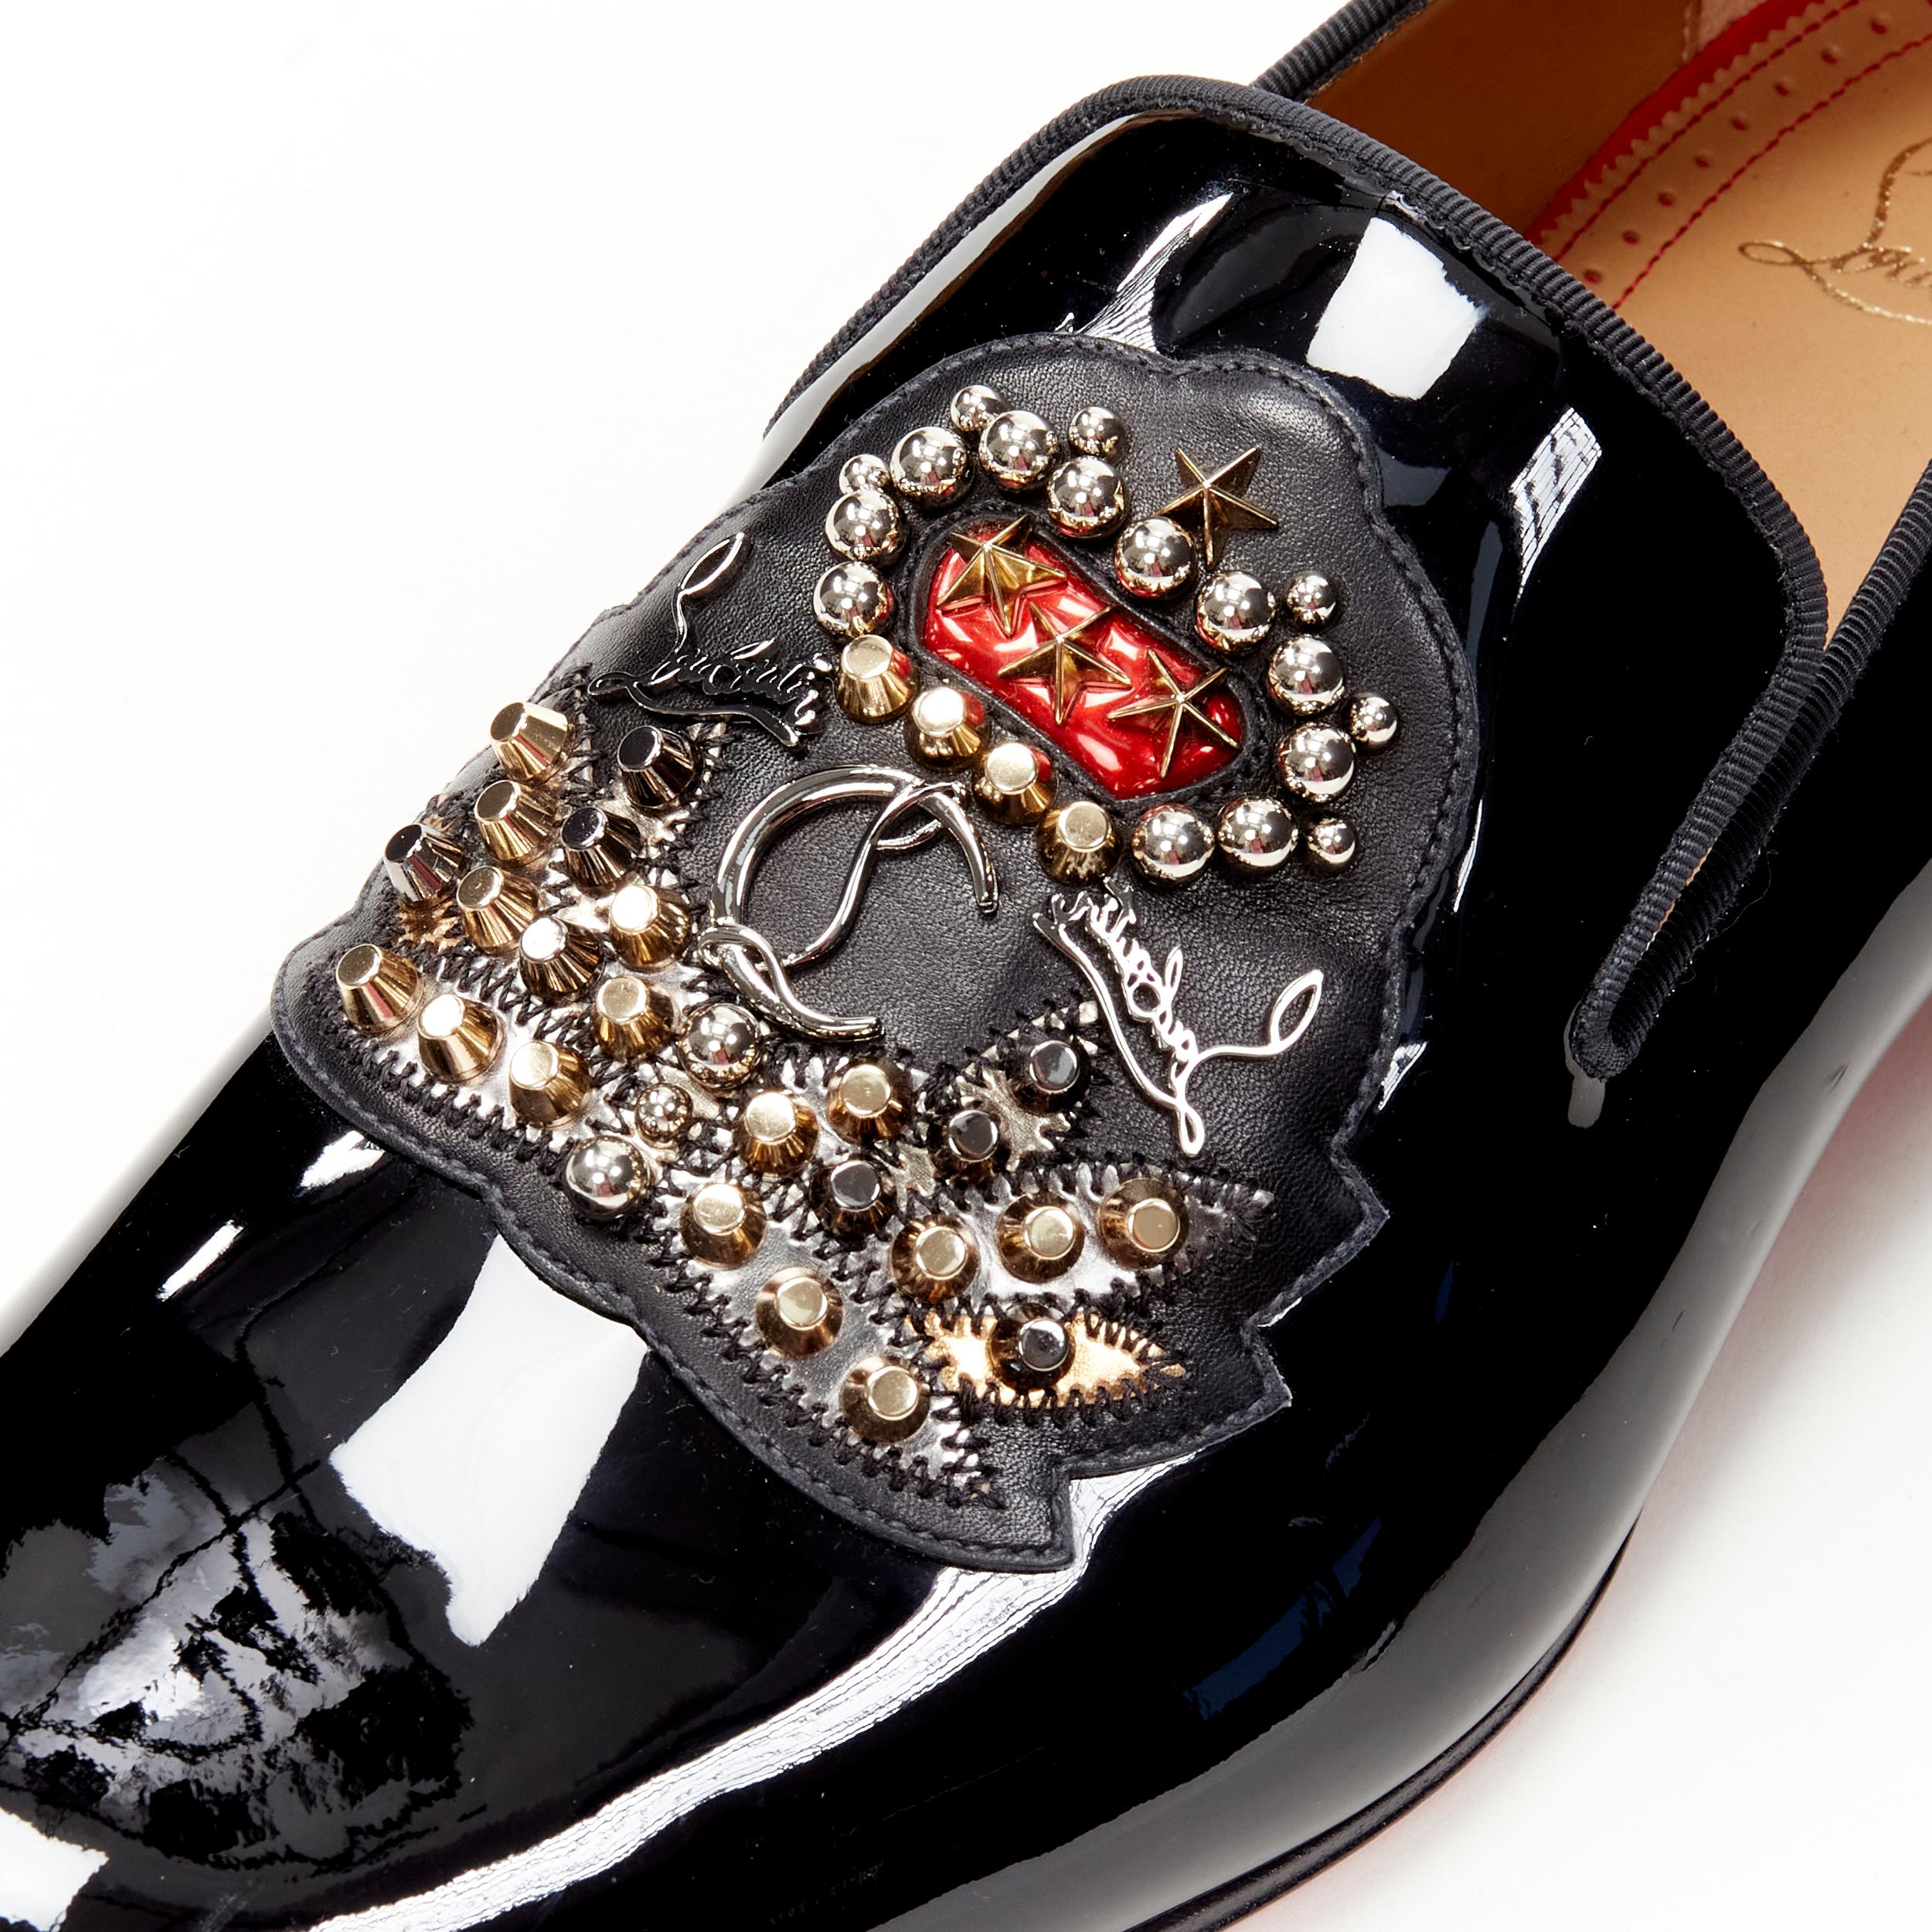 new CHRISTIAN LOUBOUTIN Ecupump Flat black patent CL crest studded loafer EU42 
Reference: TGAS/C01128 
Brand: Christian Louboutin 
Designer: Christian Louboutin 
Model: Ecupump 
Material: Patent Leather 
Color: Black 
Pattern: Solid 
Extra Detail: